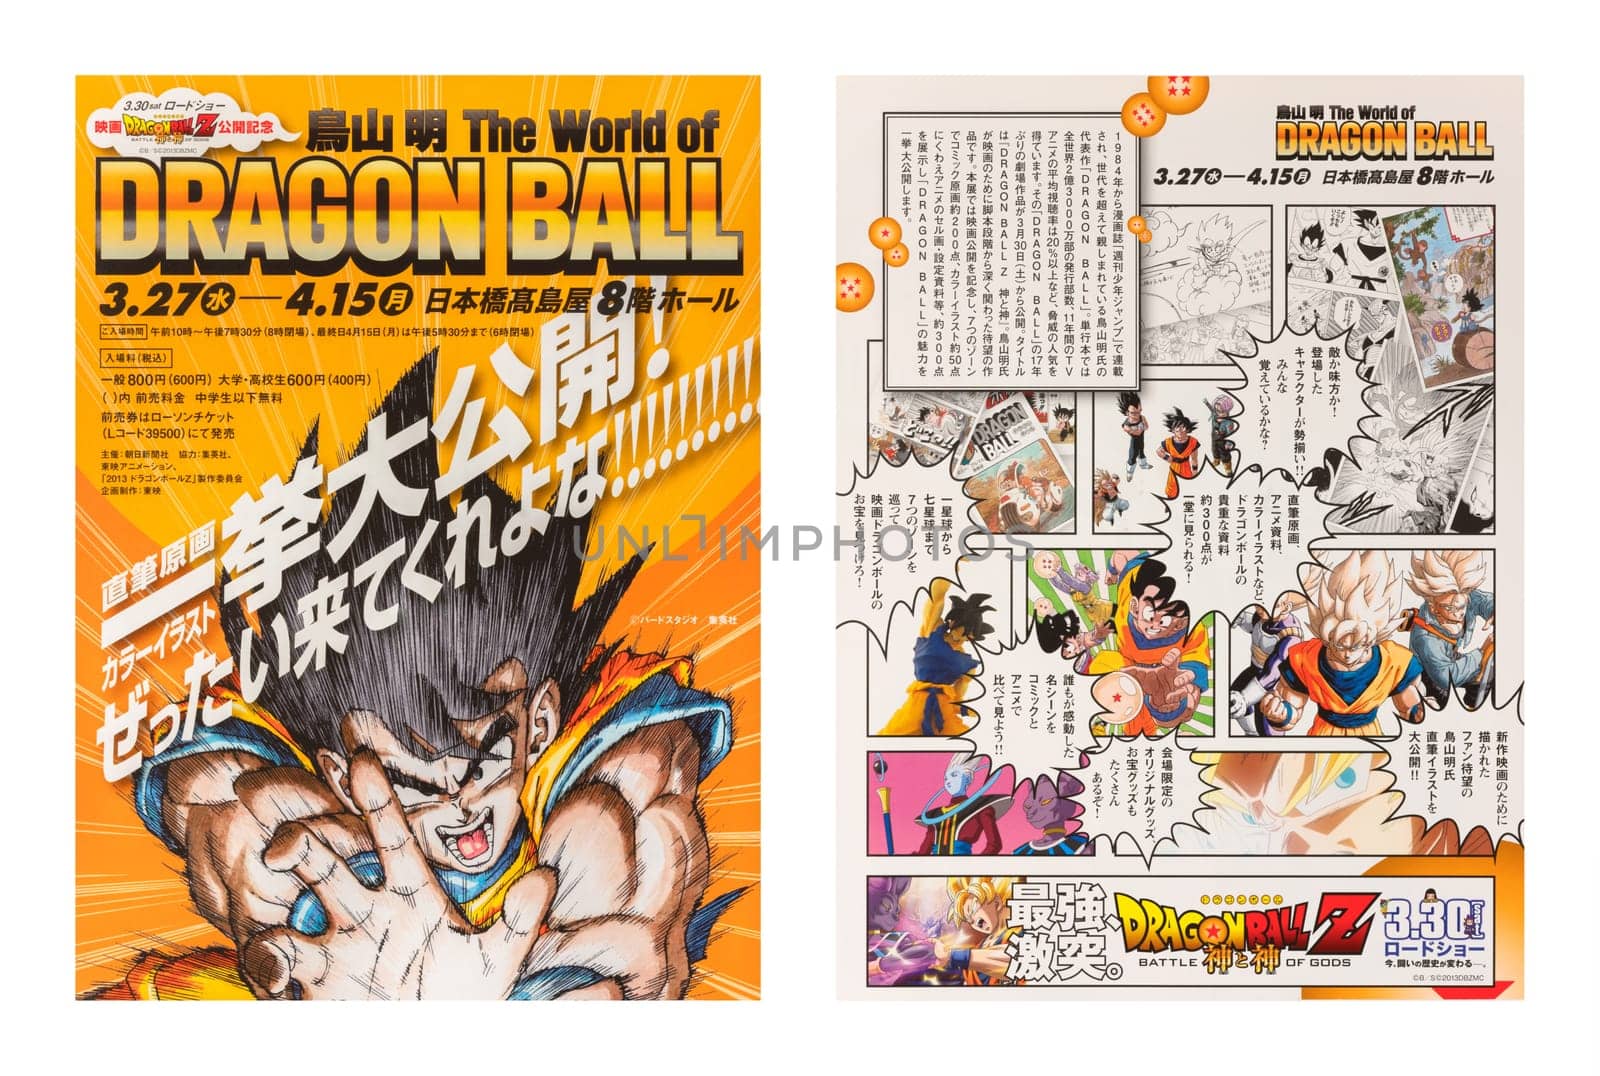 tokyo, japan - mar 27 2013: Double-sided flyer of the exhibition "Akira Toriyama The World of DRAGONBALL" held to celebrate the release of the anime film "Dragon Ball Z: Battle of Gods" (left: front)